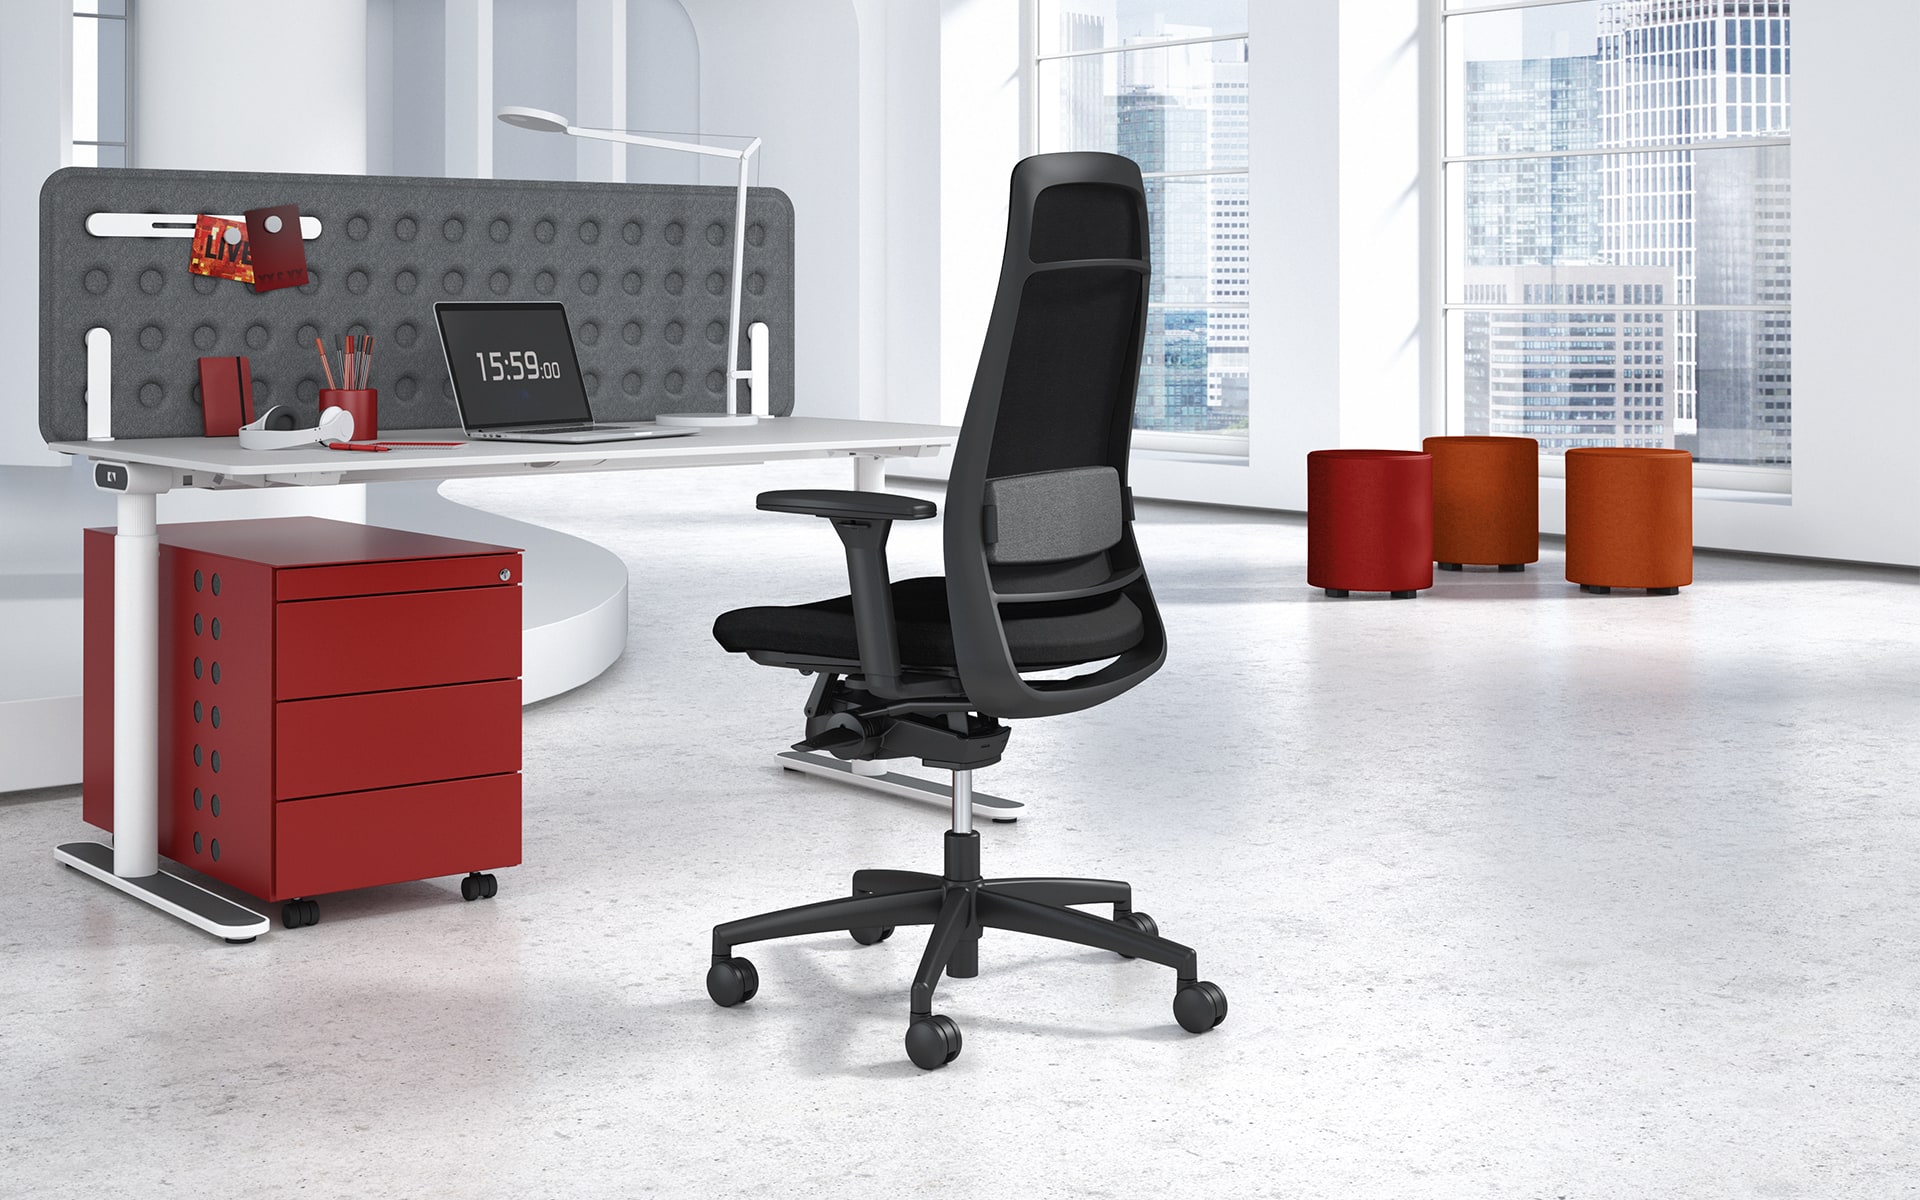 Black K+N TensaNext swivel chair by ITO Design in spacious workspace with red accents